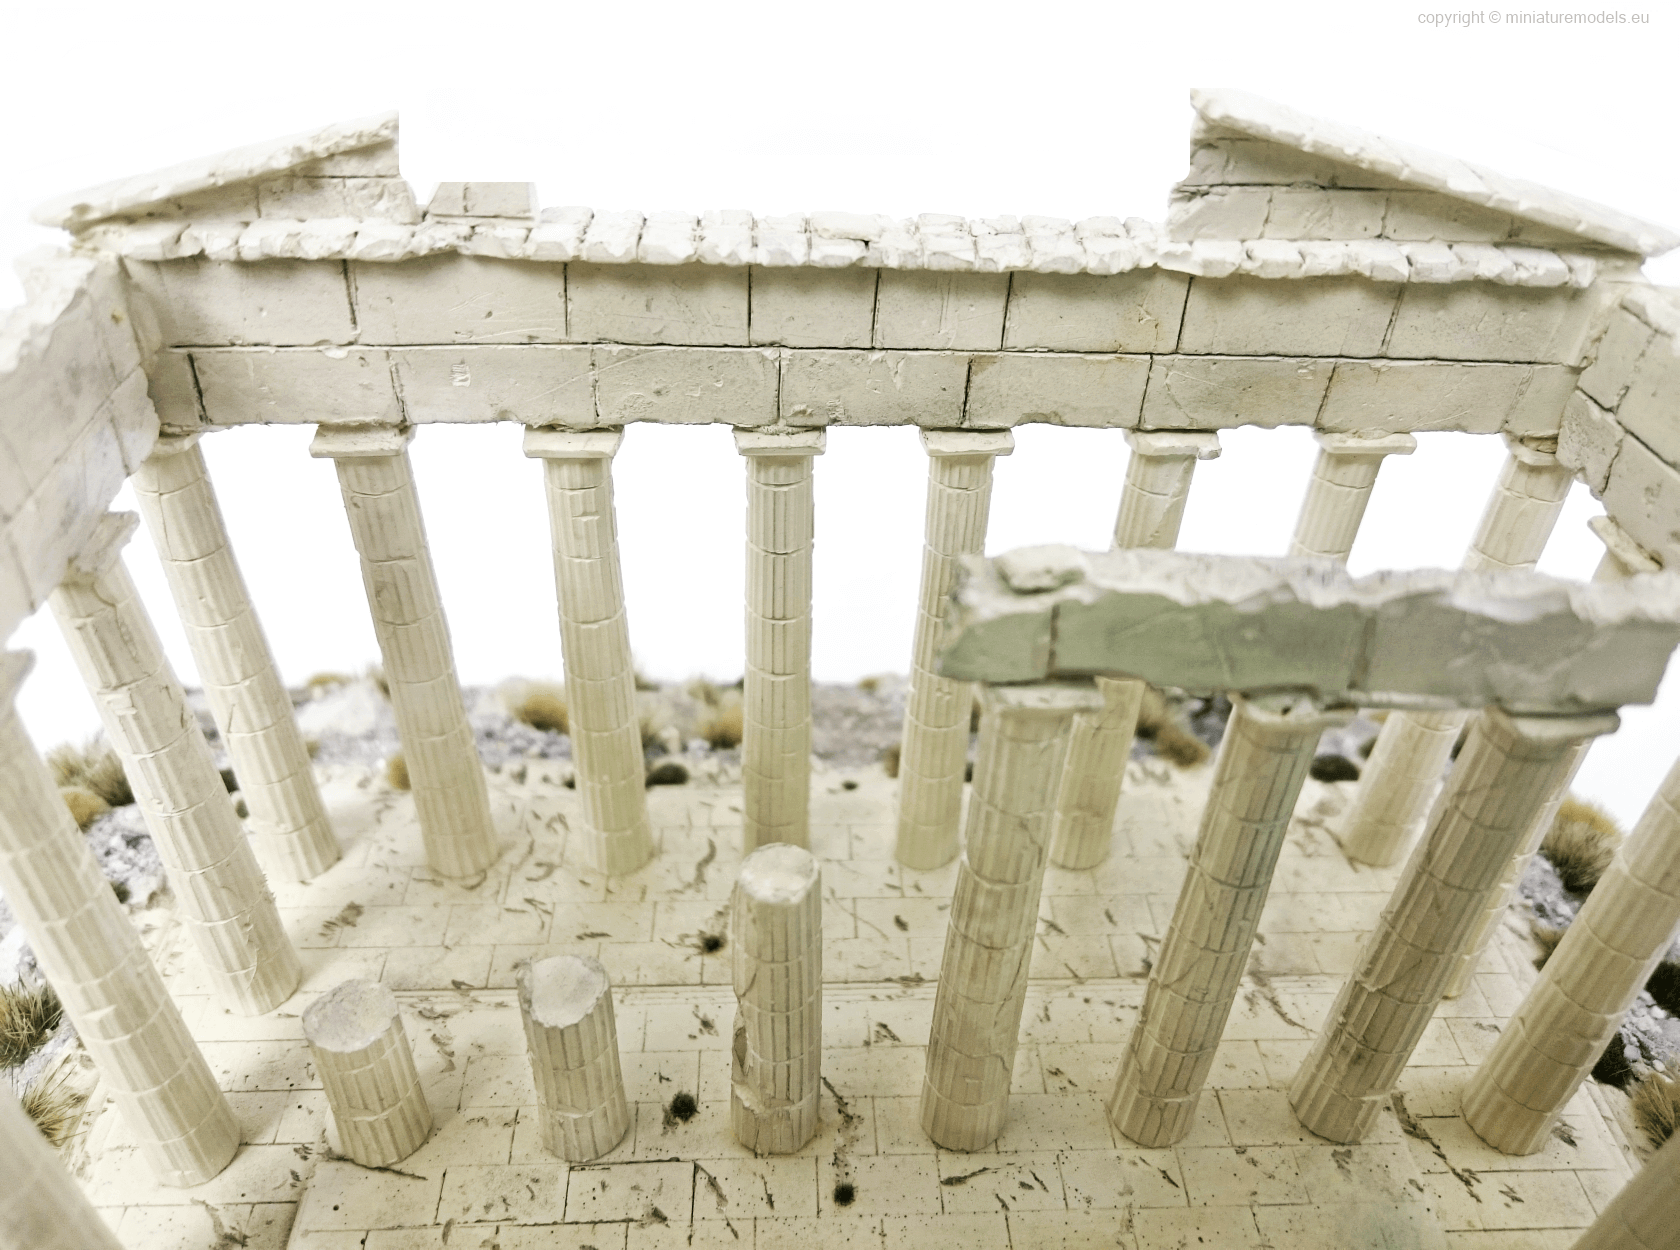 Inside view of the Parthenon model